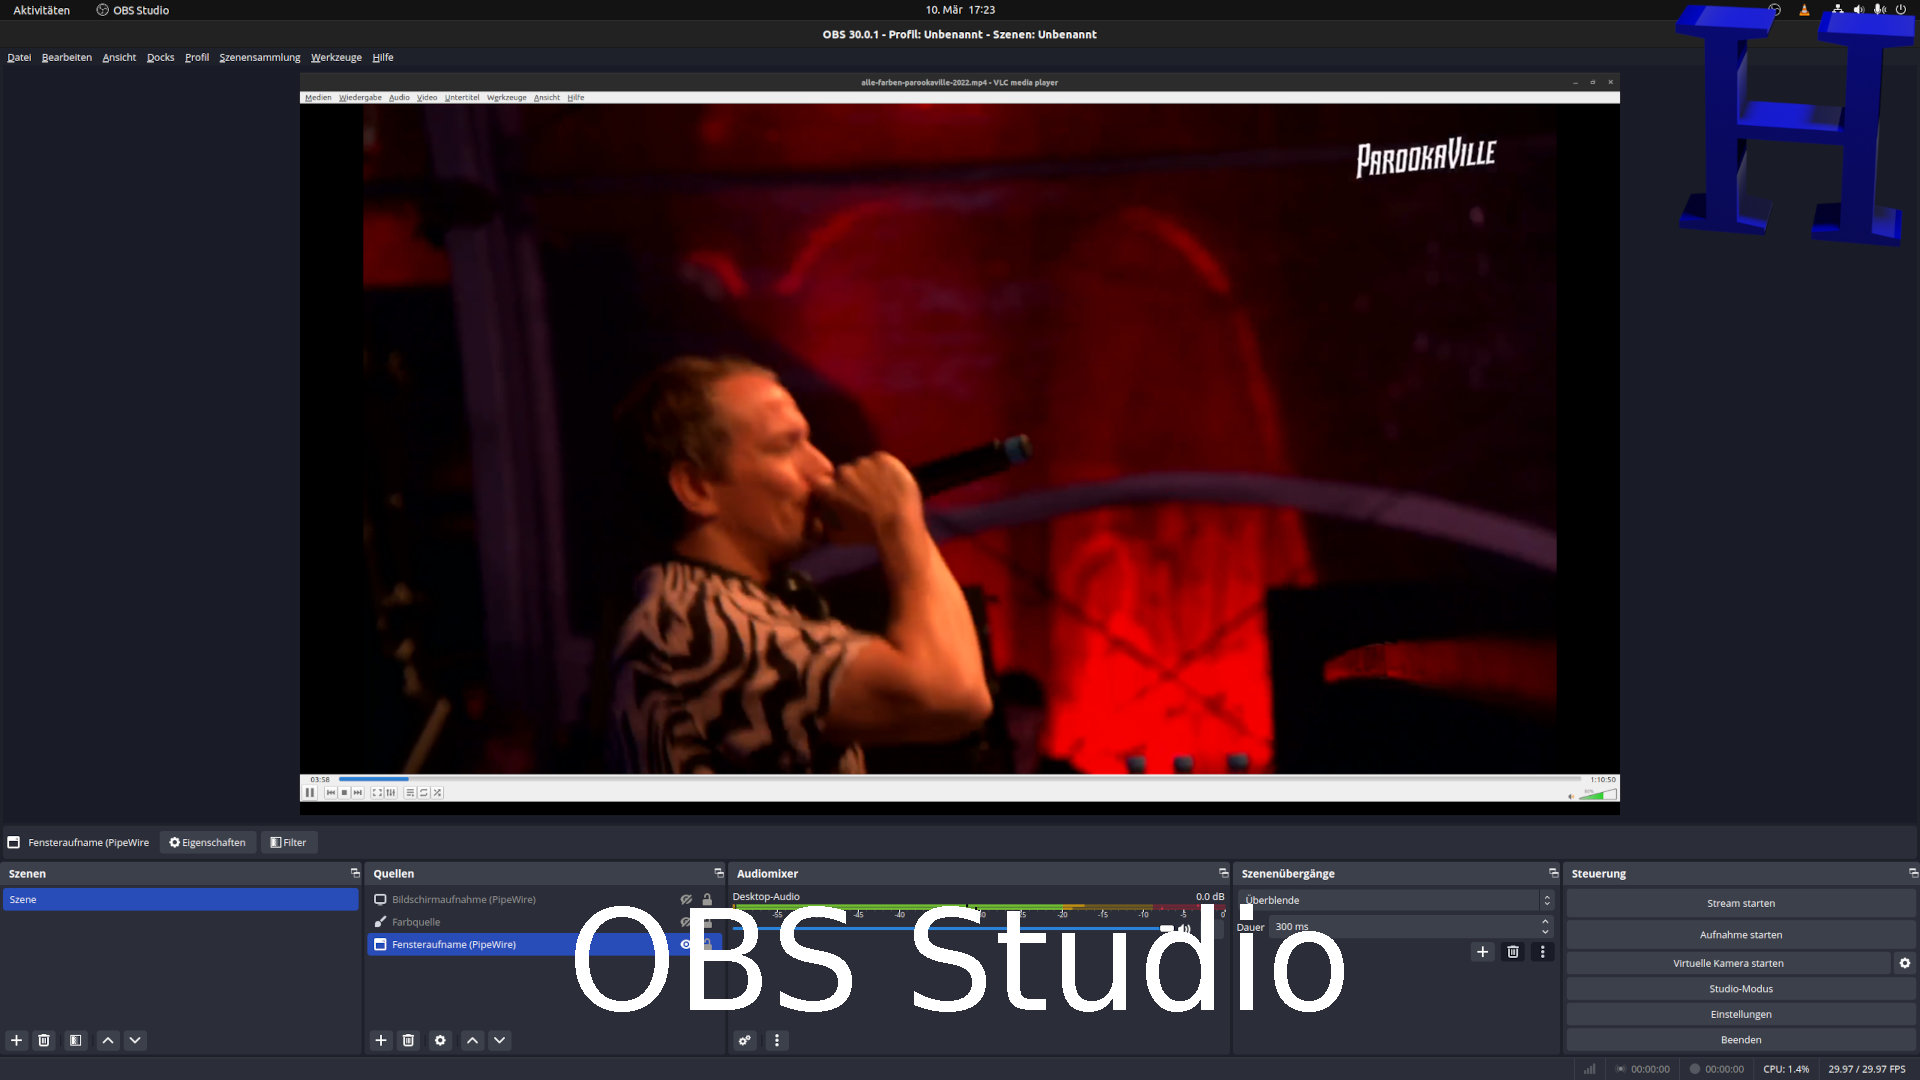 OBS Studio Open Broadcaster Software